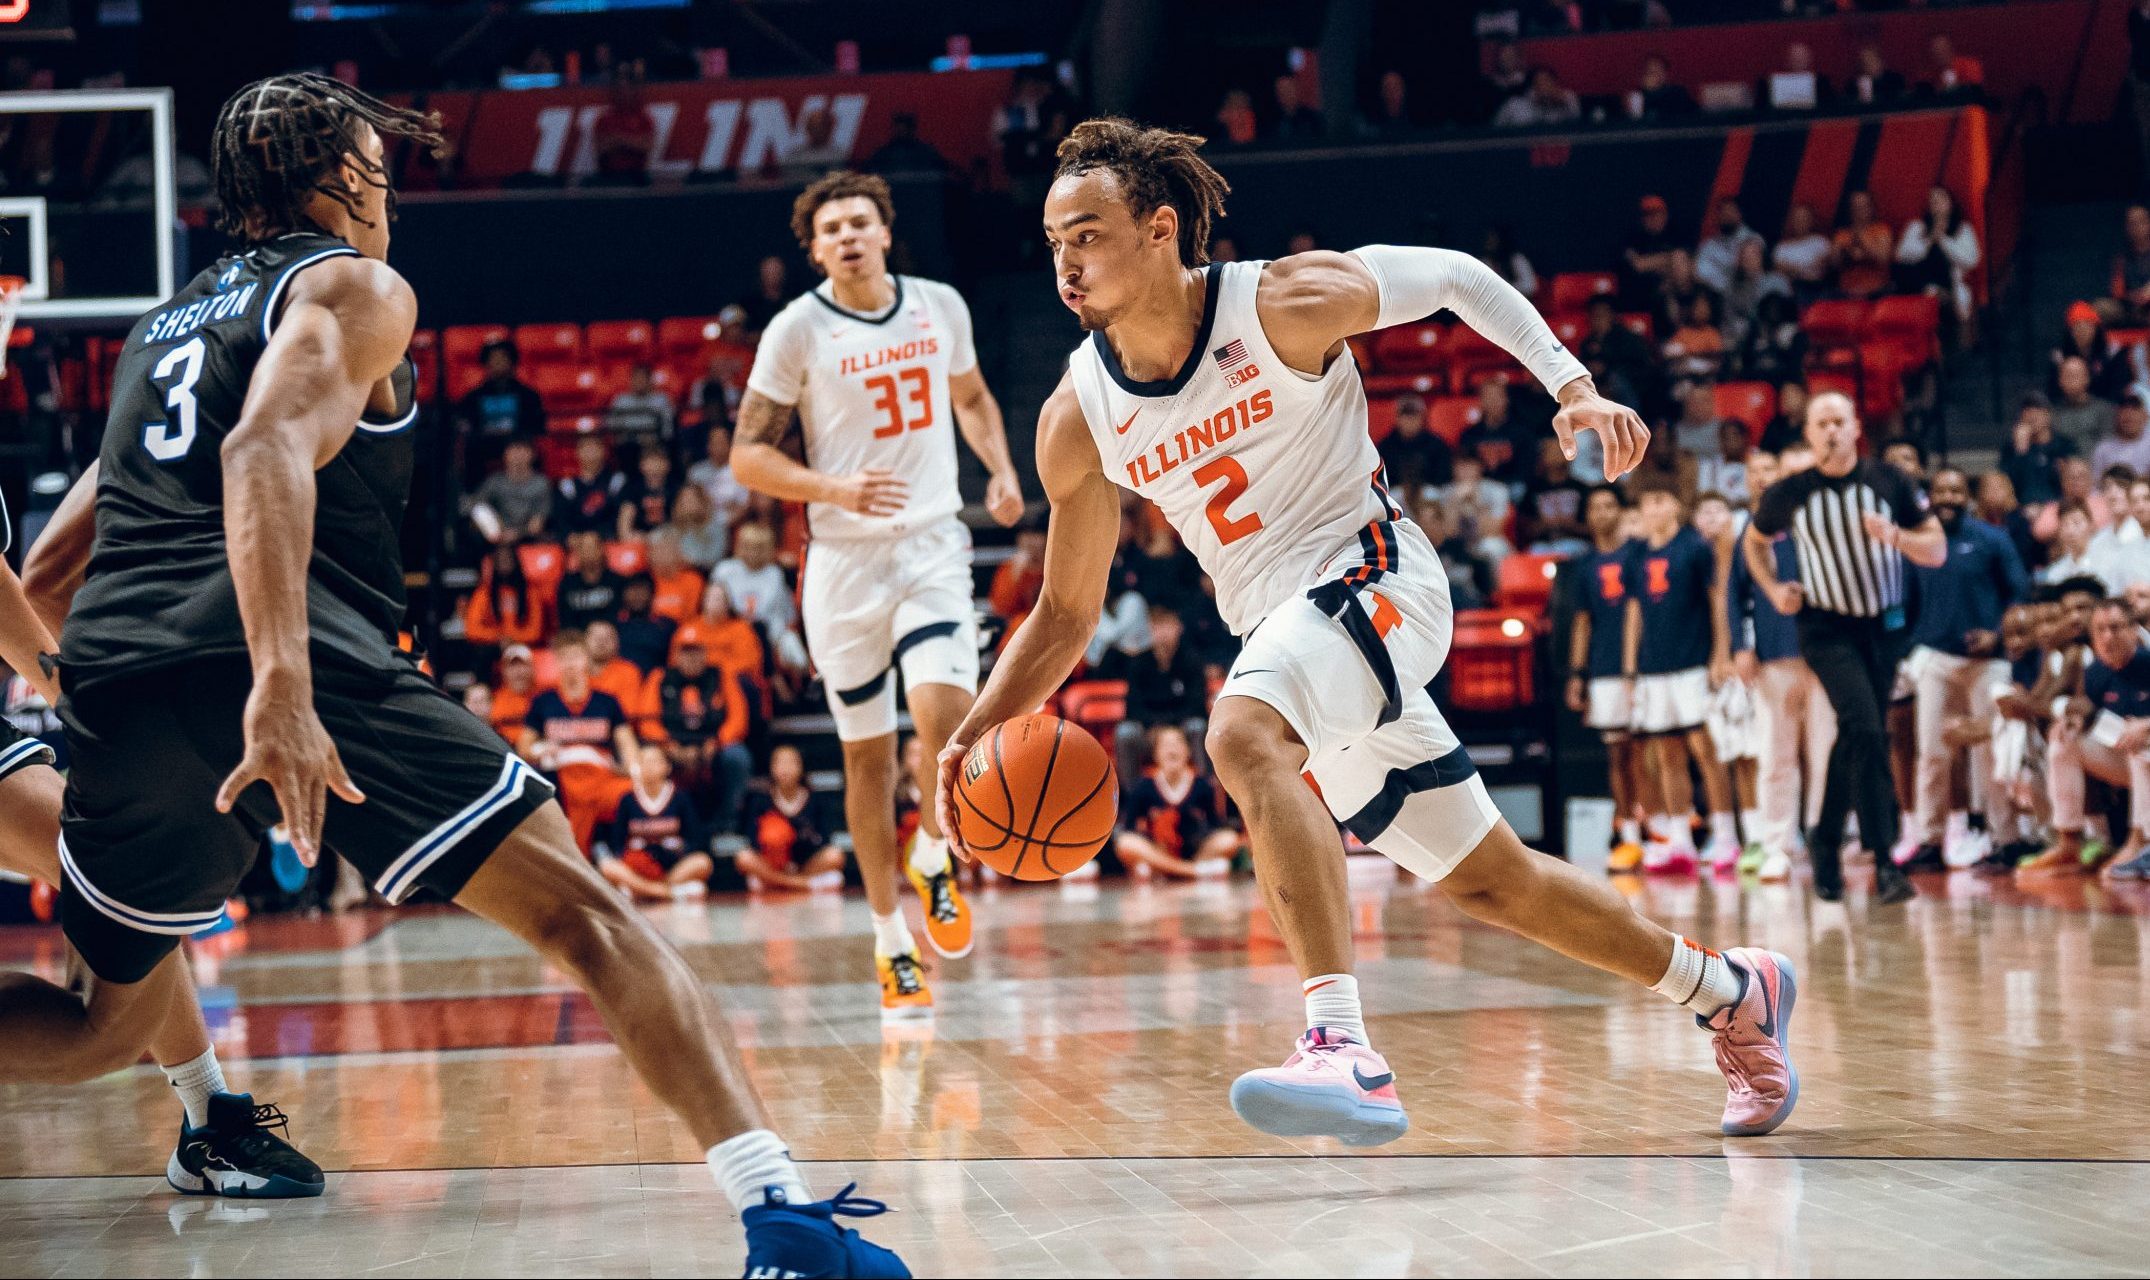 #25 Illini Overcome Cold Shooting From Arc, Line To Whip EIU In Season Opener